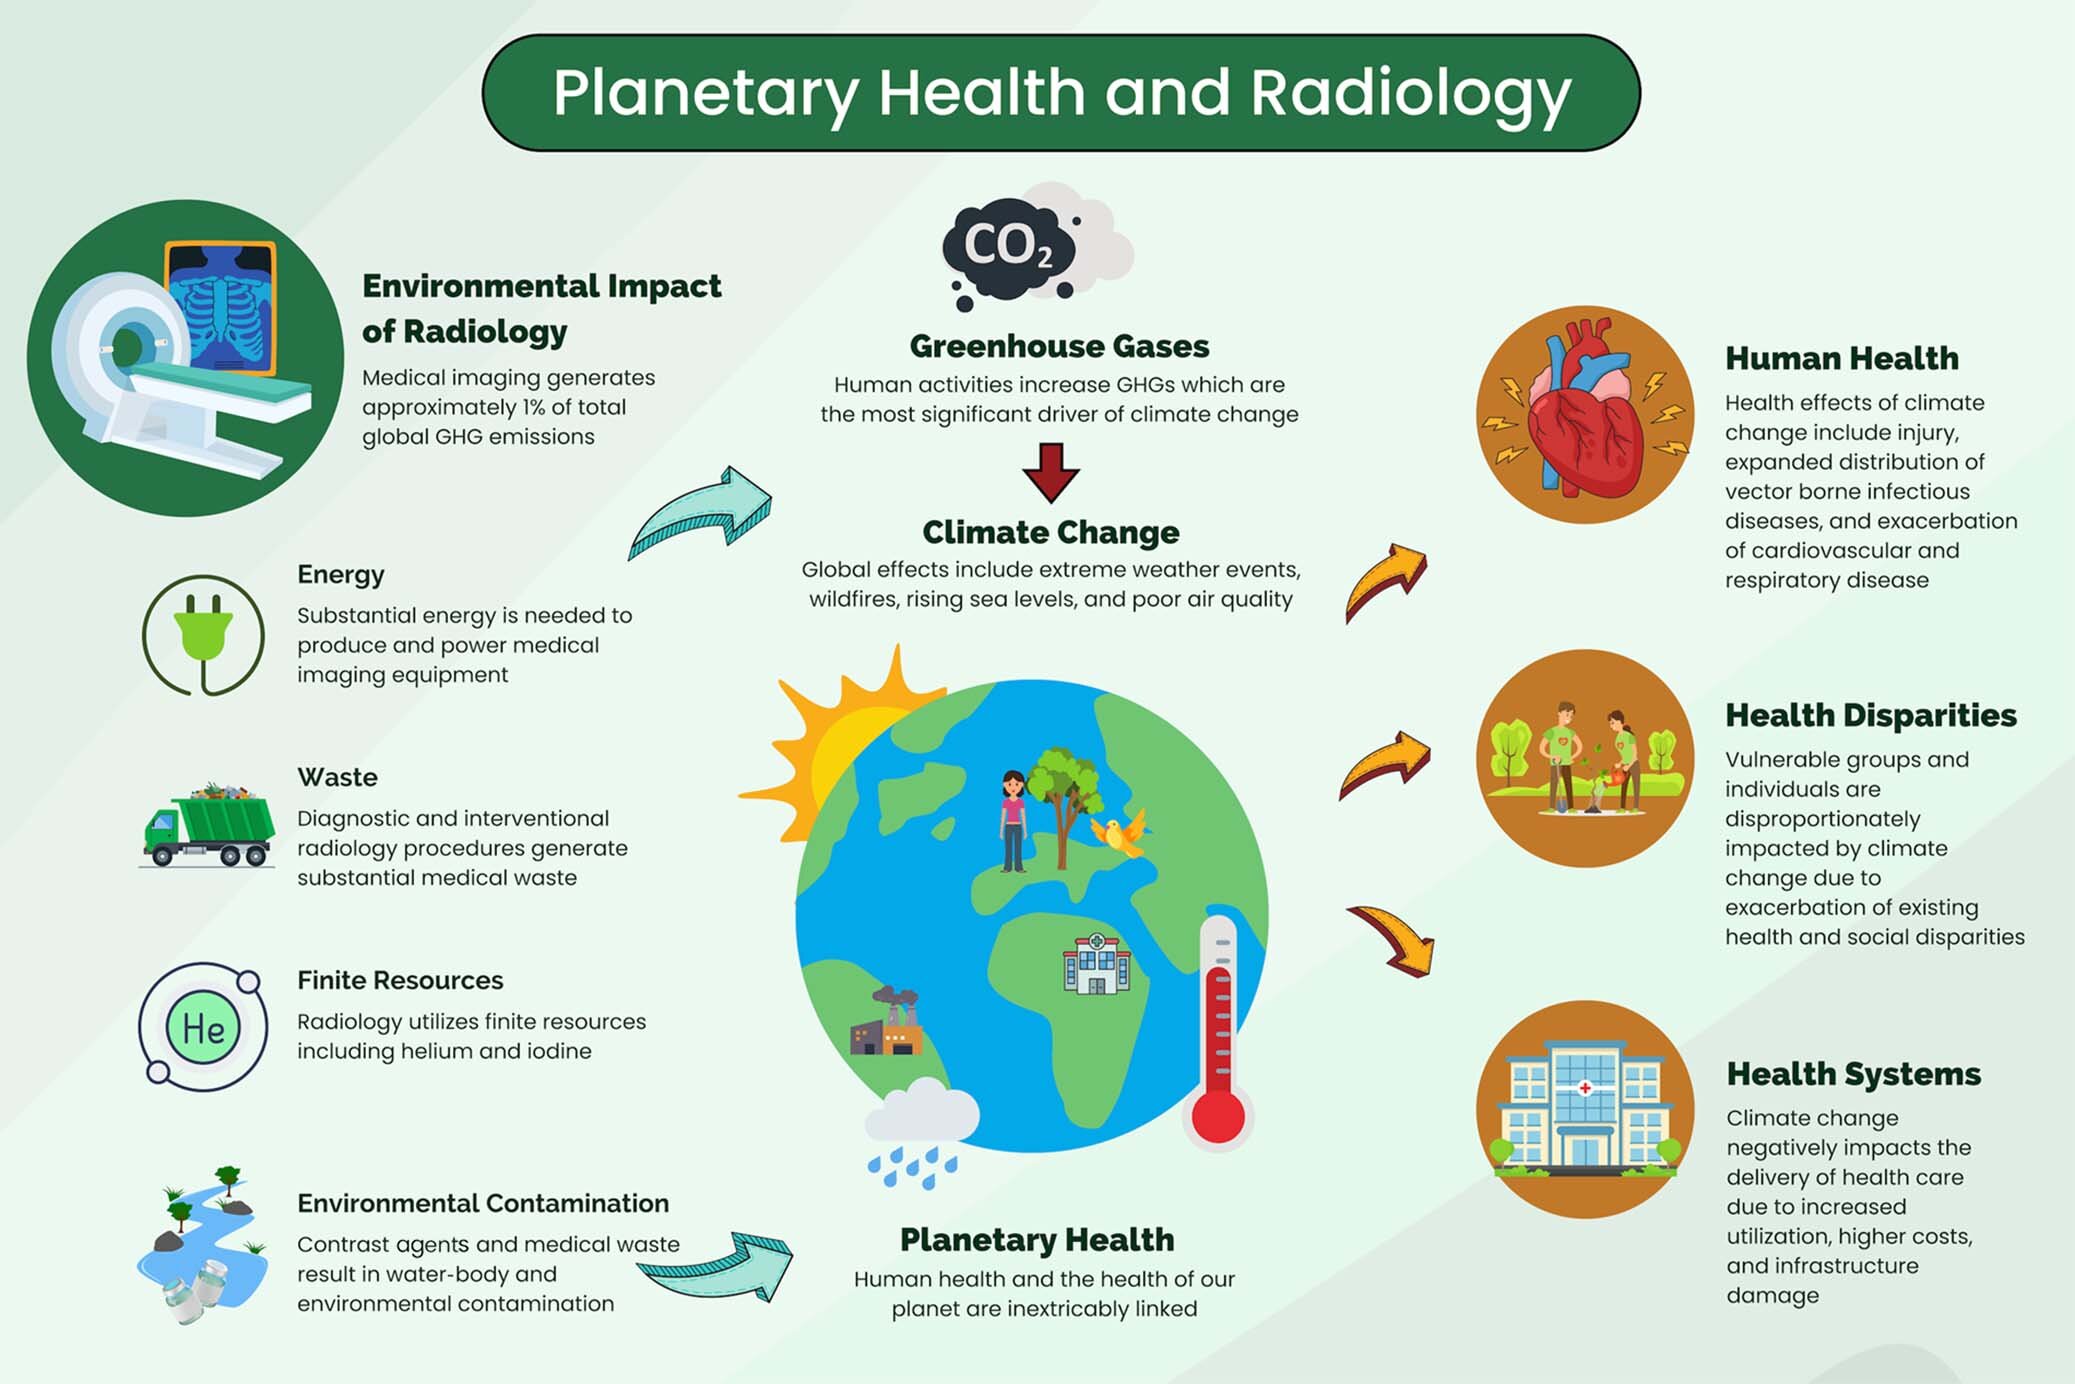 #Radiologists propose actions to combat climate change